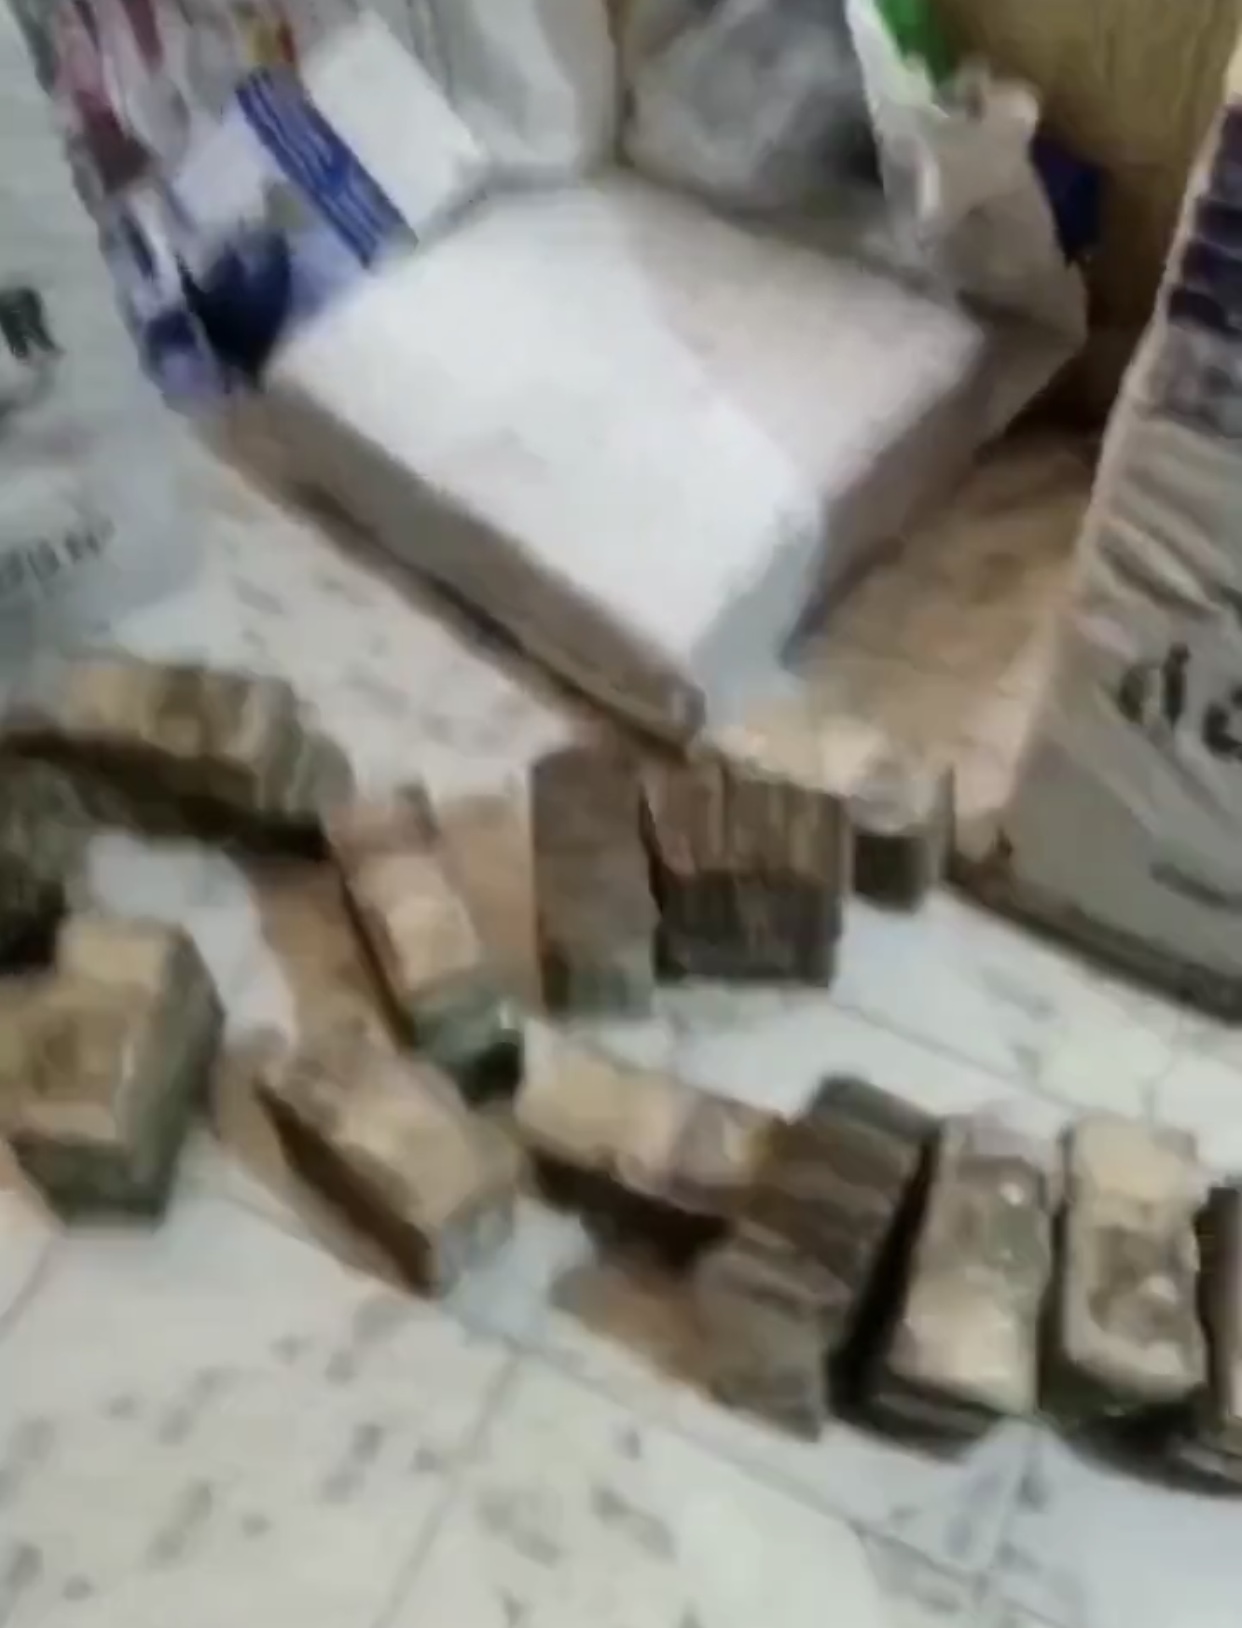 VIDEO: See Another Bags Of Mutilated N1000 Notes